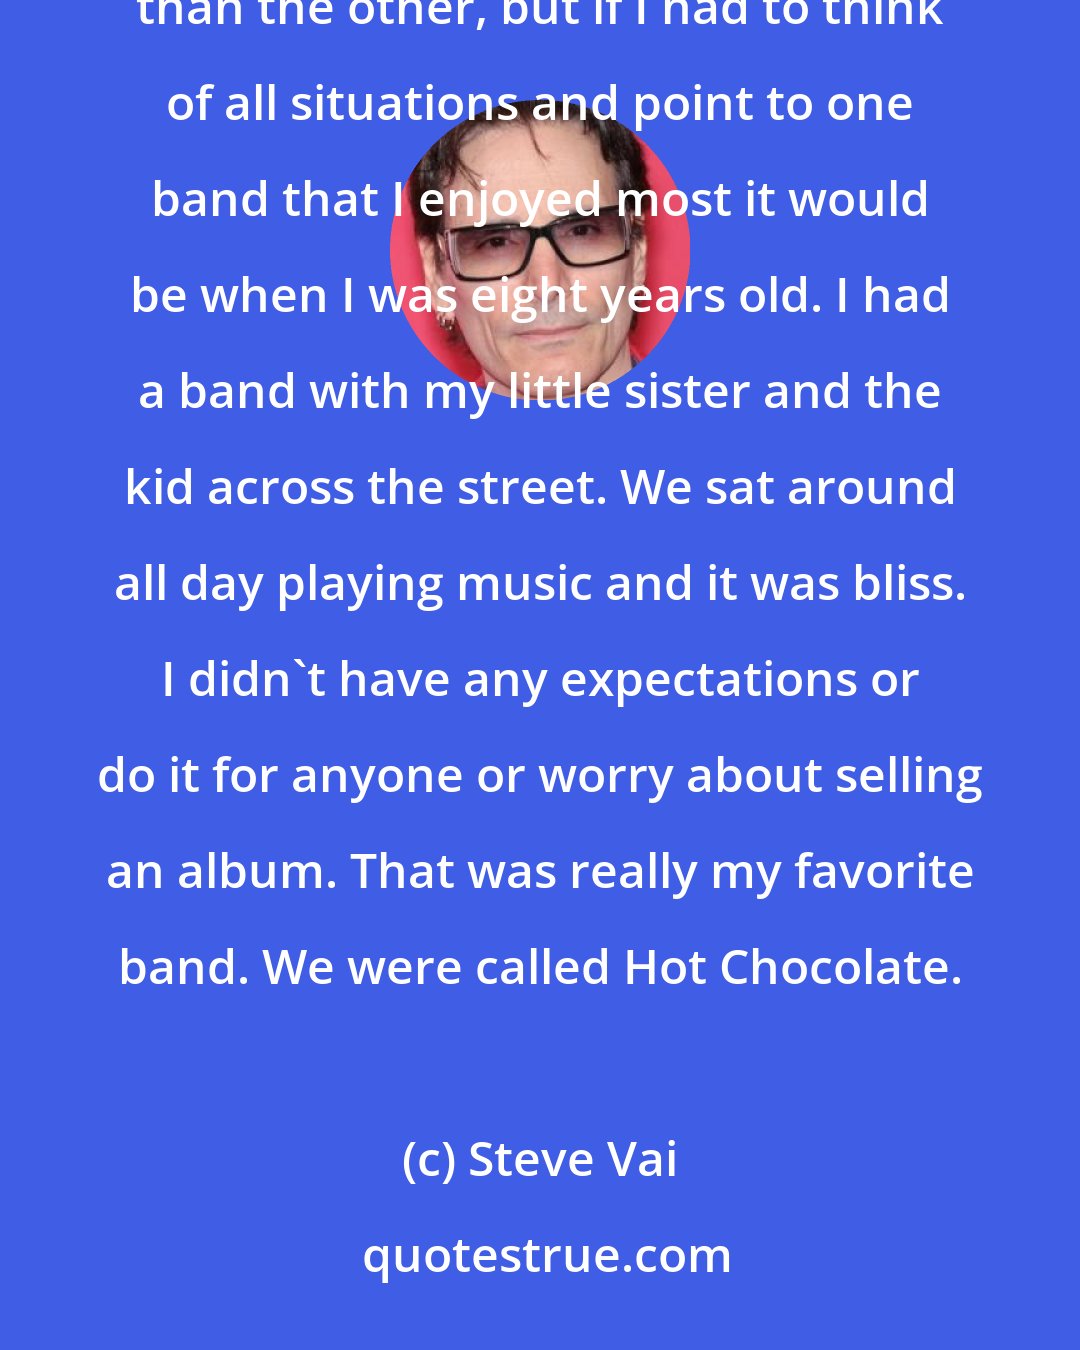 Steve Vai: There's very notable dynamics in all of the collaborations I've done. It's hard to say if one is more important than the other, but if I had to think of all situations and point to one band that I enjoyed most it would be when I was eight years old. I had a band with my little sister and the kid across the street. We sat around all day playing music and it was bliss. I didn't have any expectations or do it for anyone or worry about selling an album. That was really my favorite band. We were called Hot Chocolate.